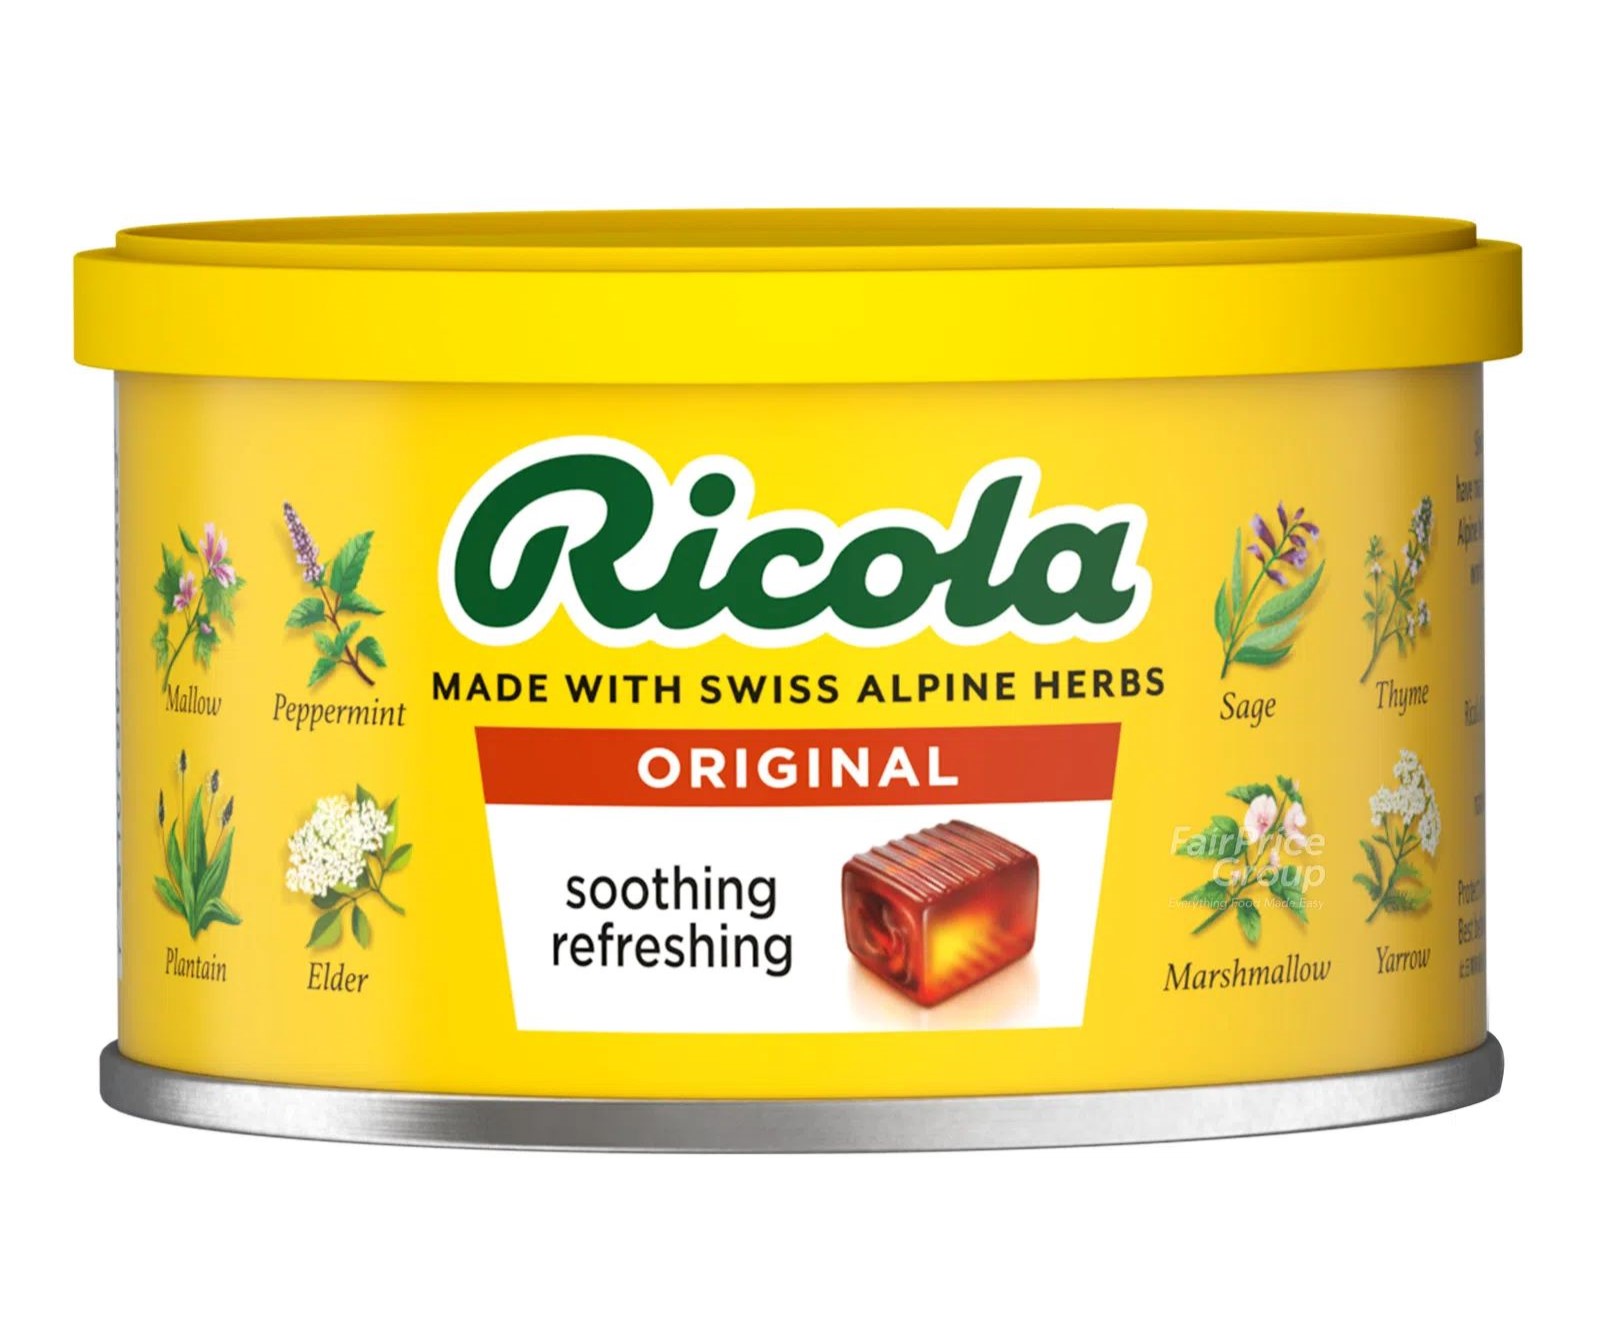 19-ricola-nutrition-facts